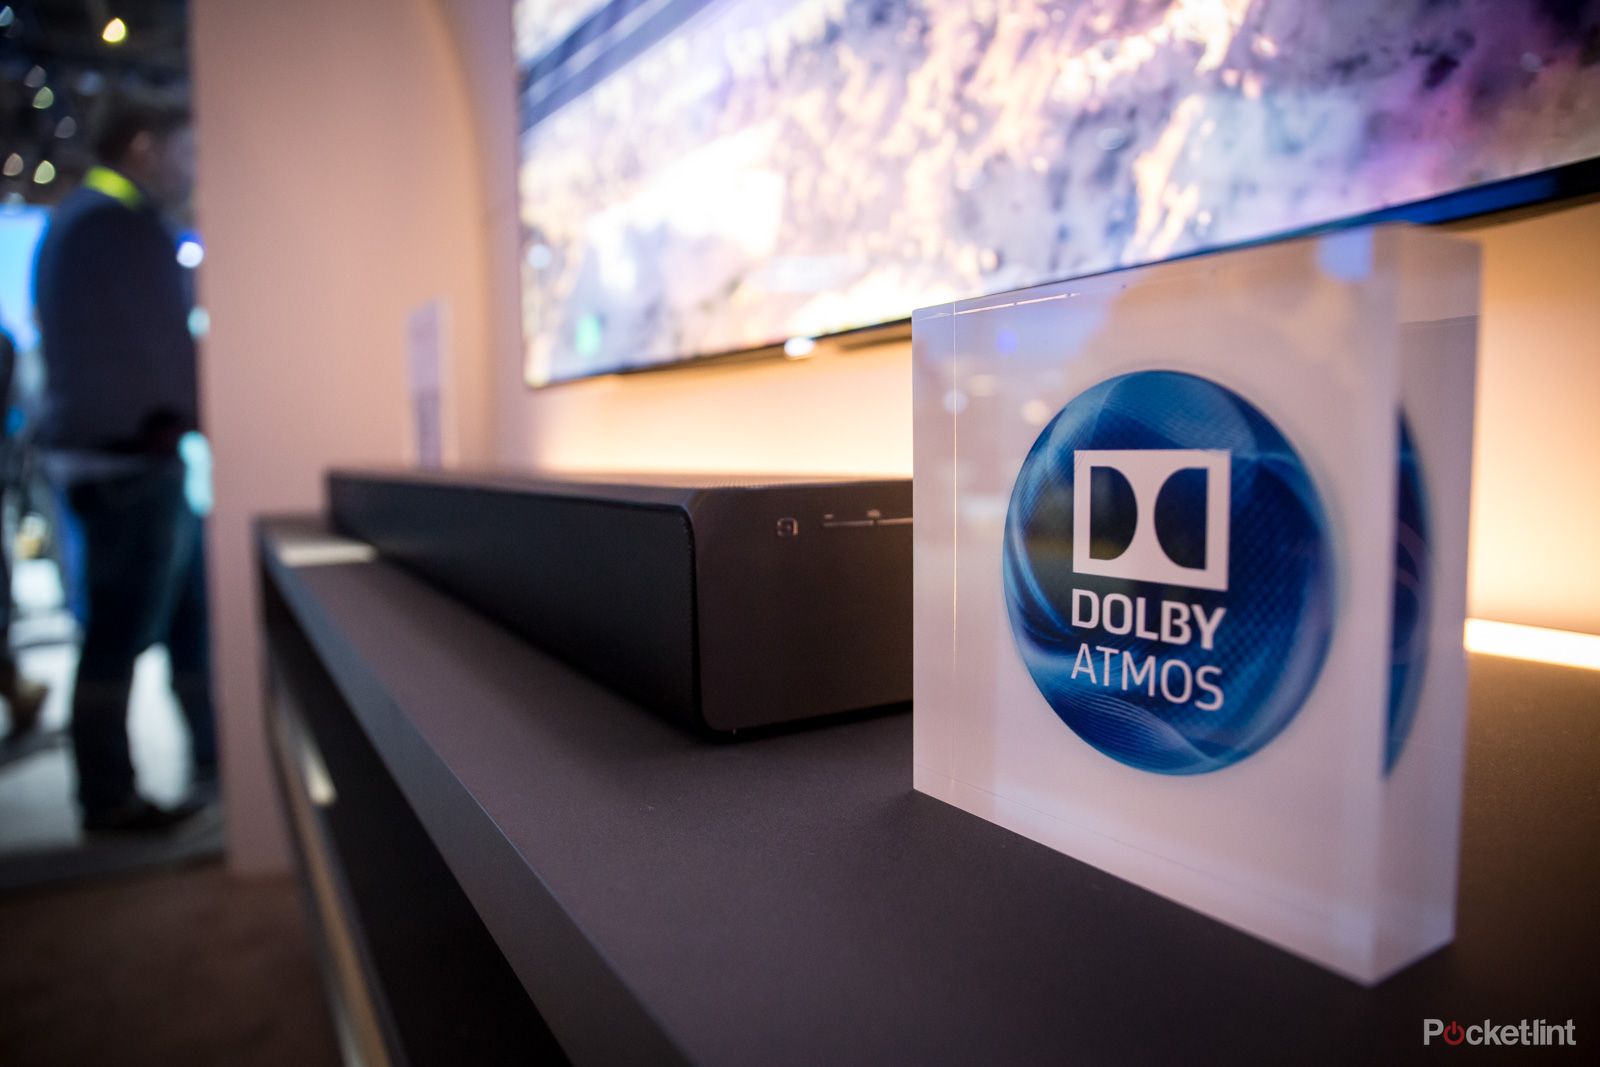 What is Dolby Atmos and how do I get it?